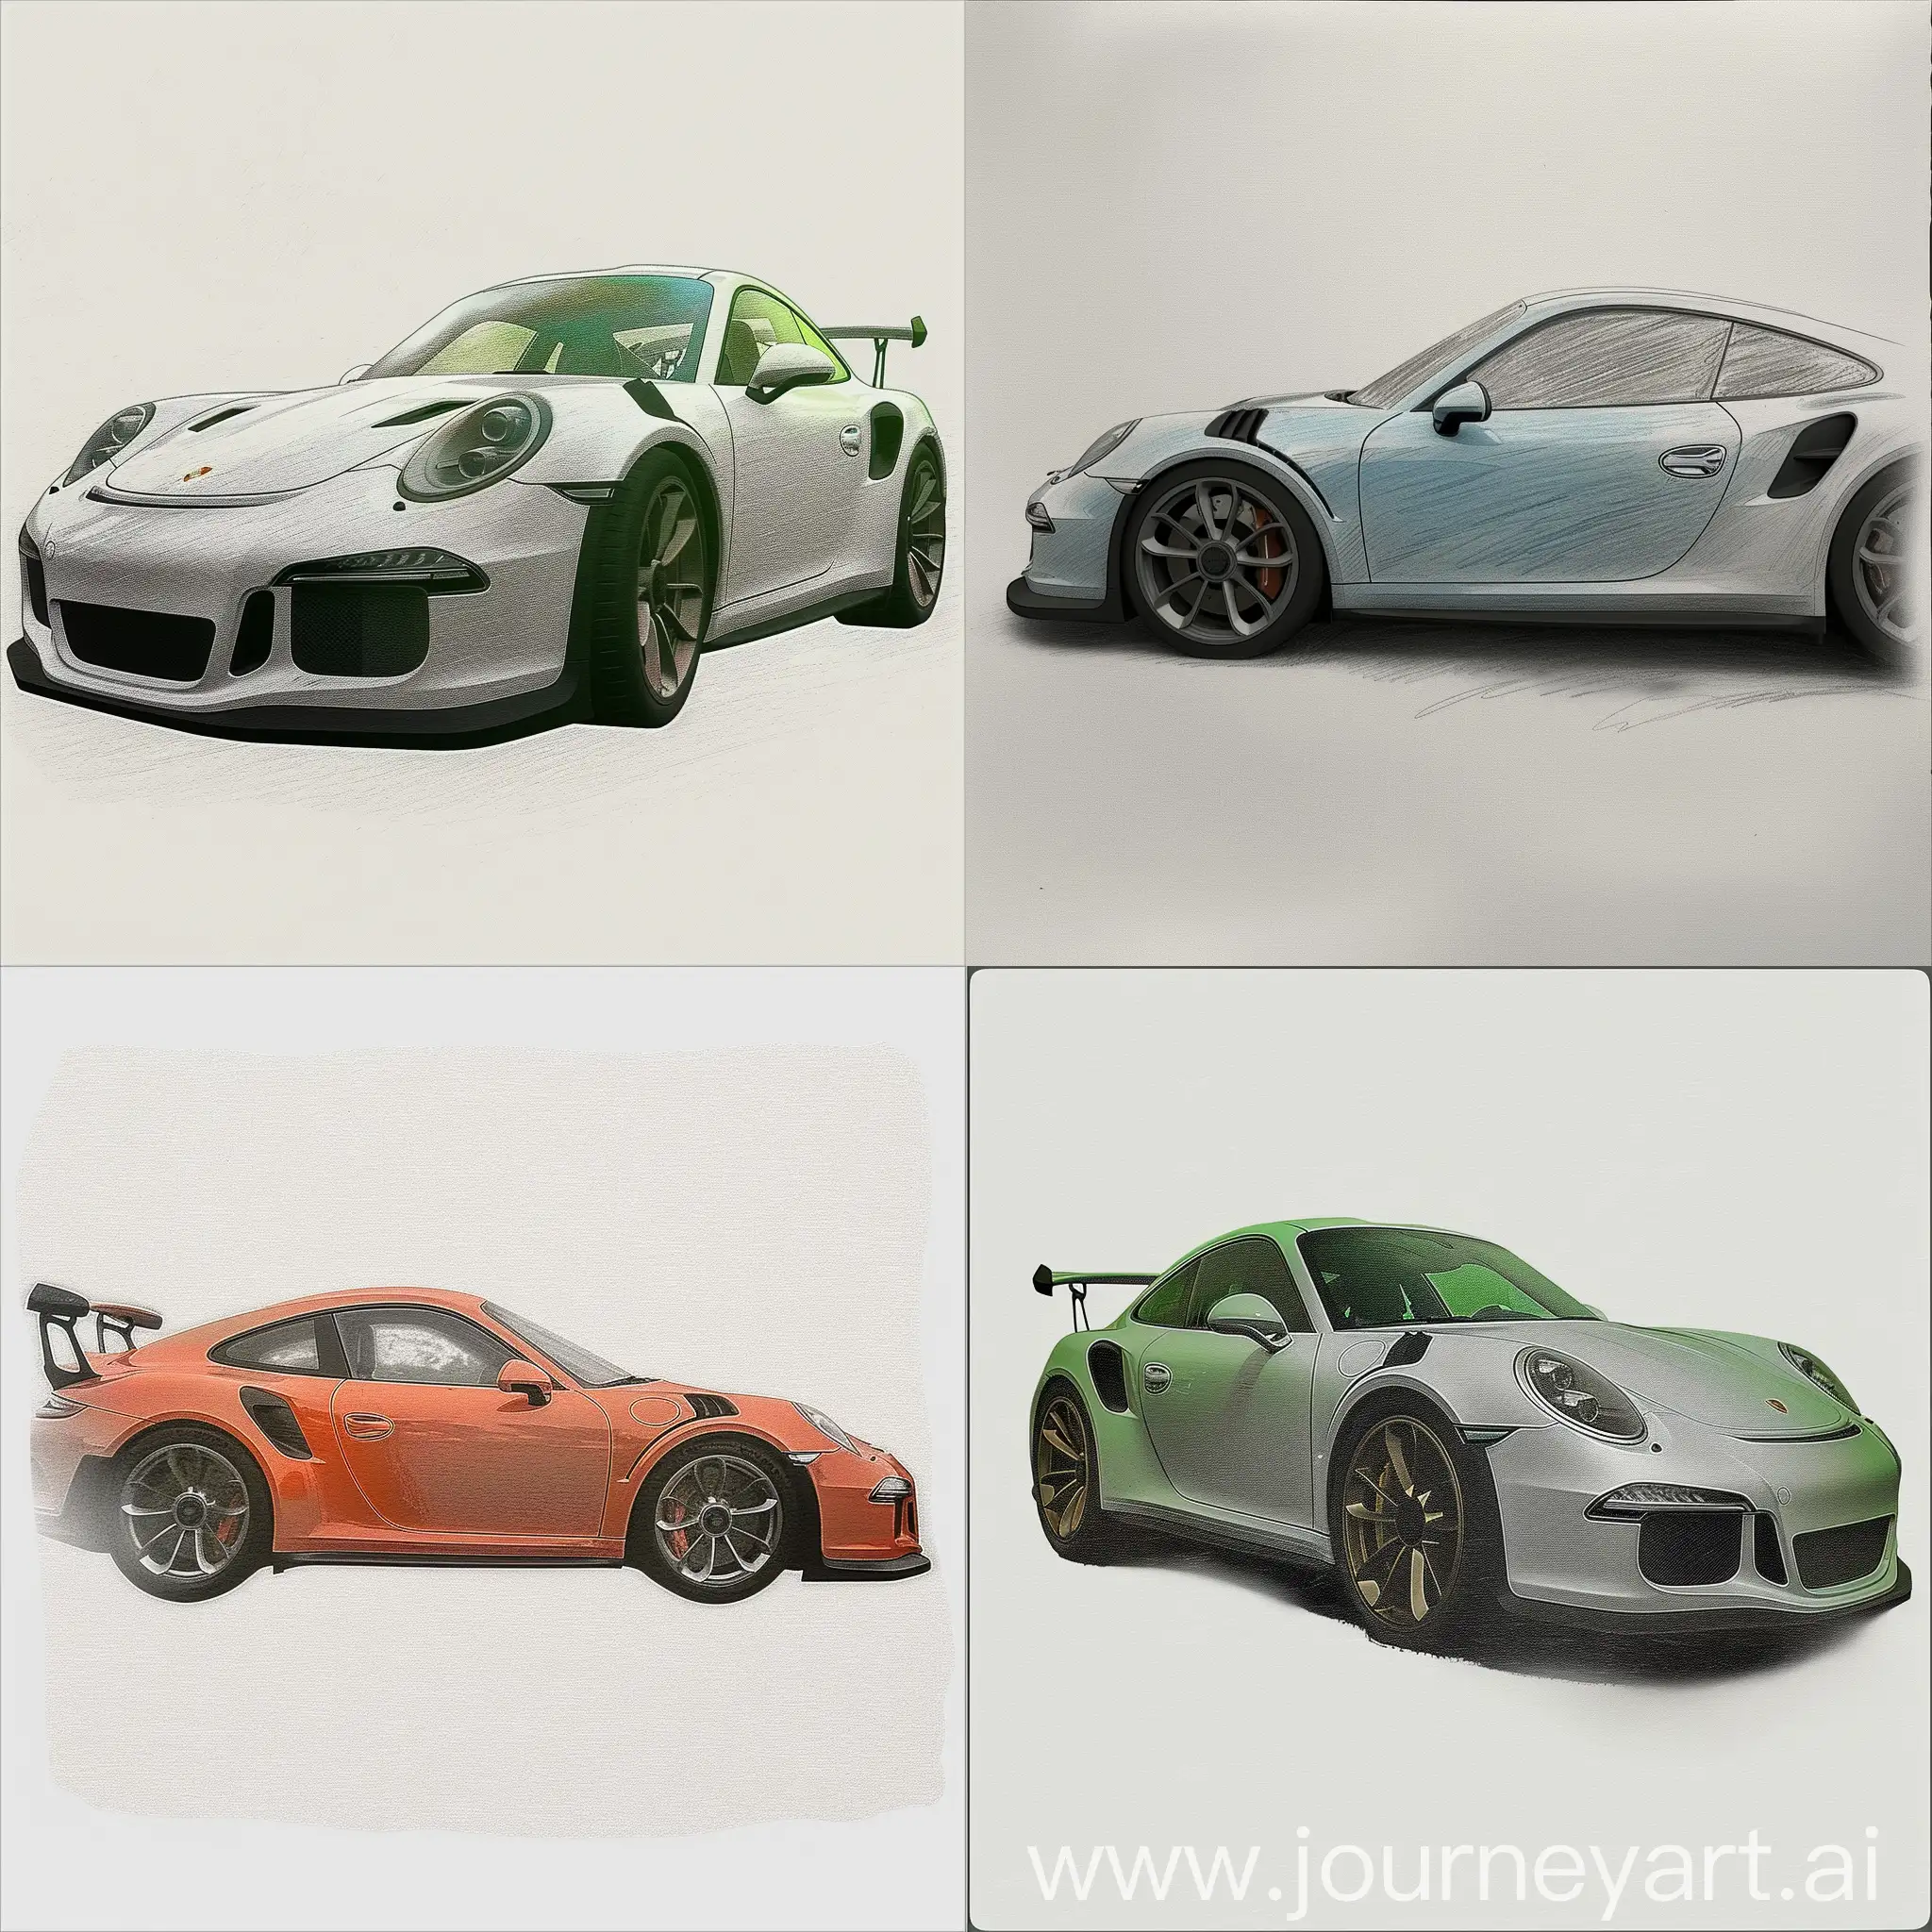 A Porche Gt3Rs with A high-resolution transparent .PNG at 150dpi. Minimum dimensions of at least 1500px by 1995px (not including outer transparent pixels